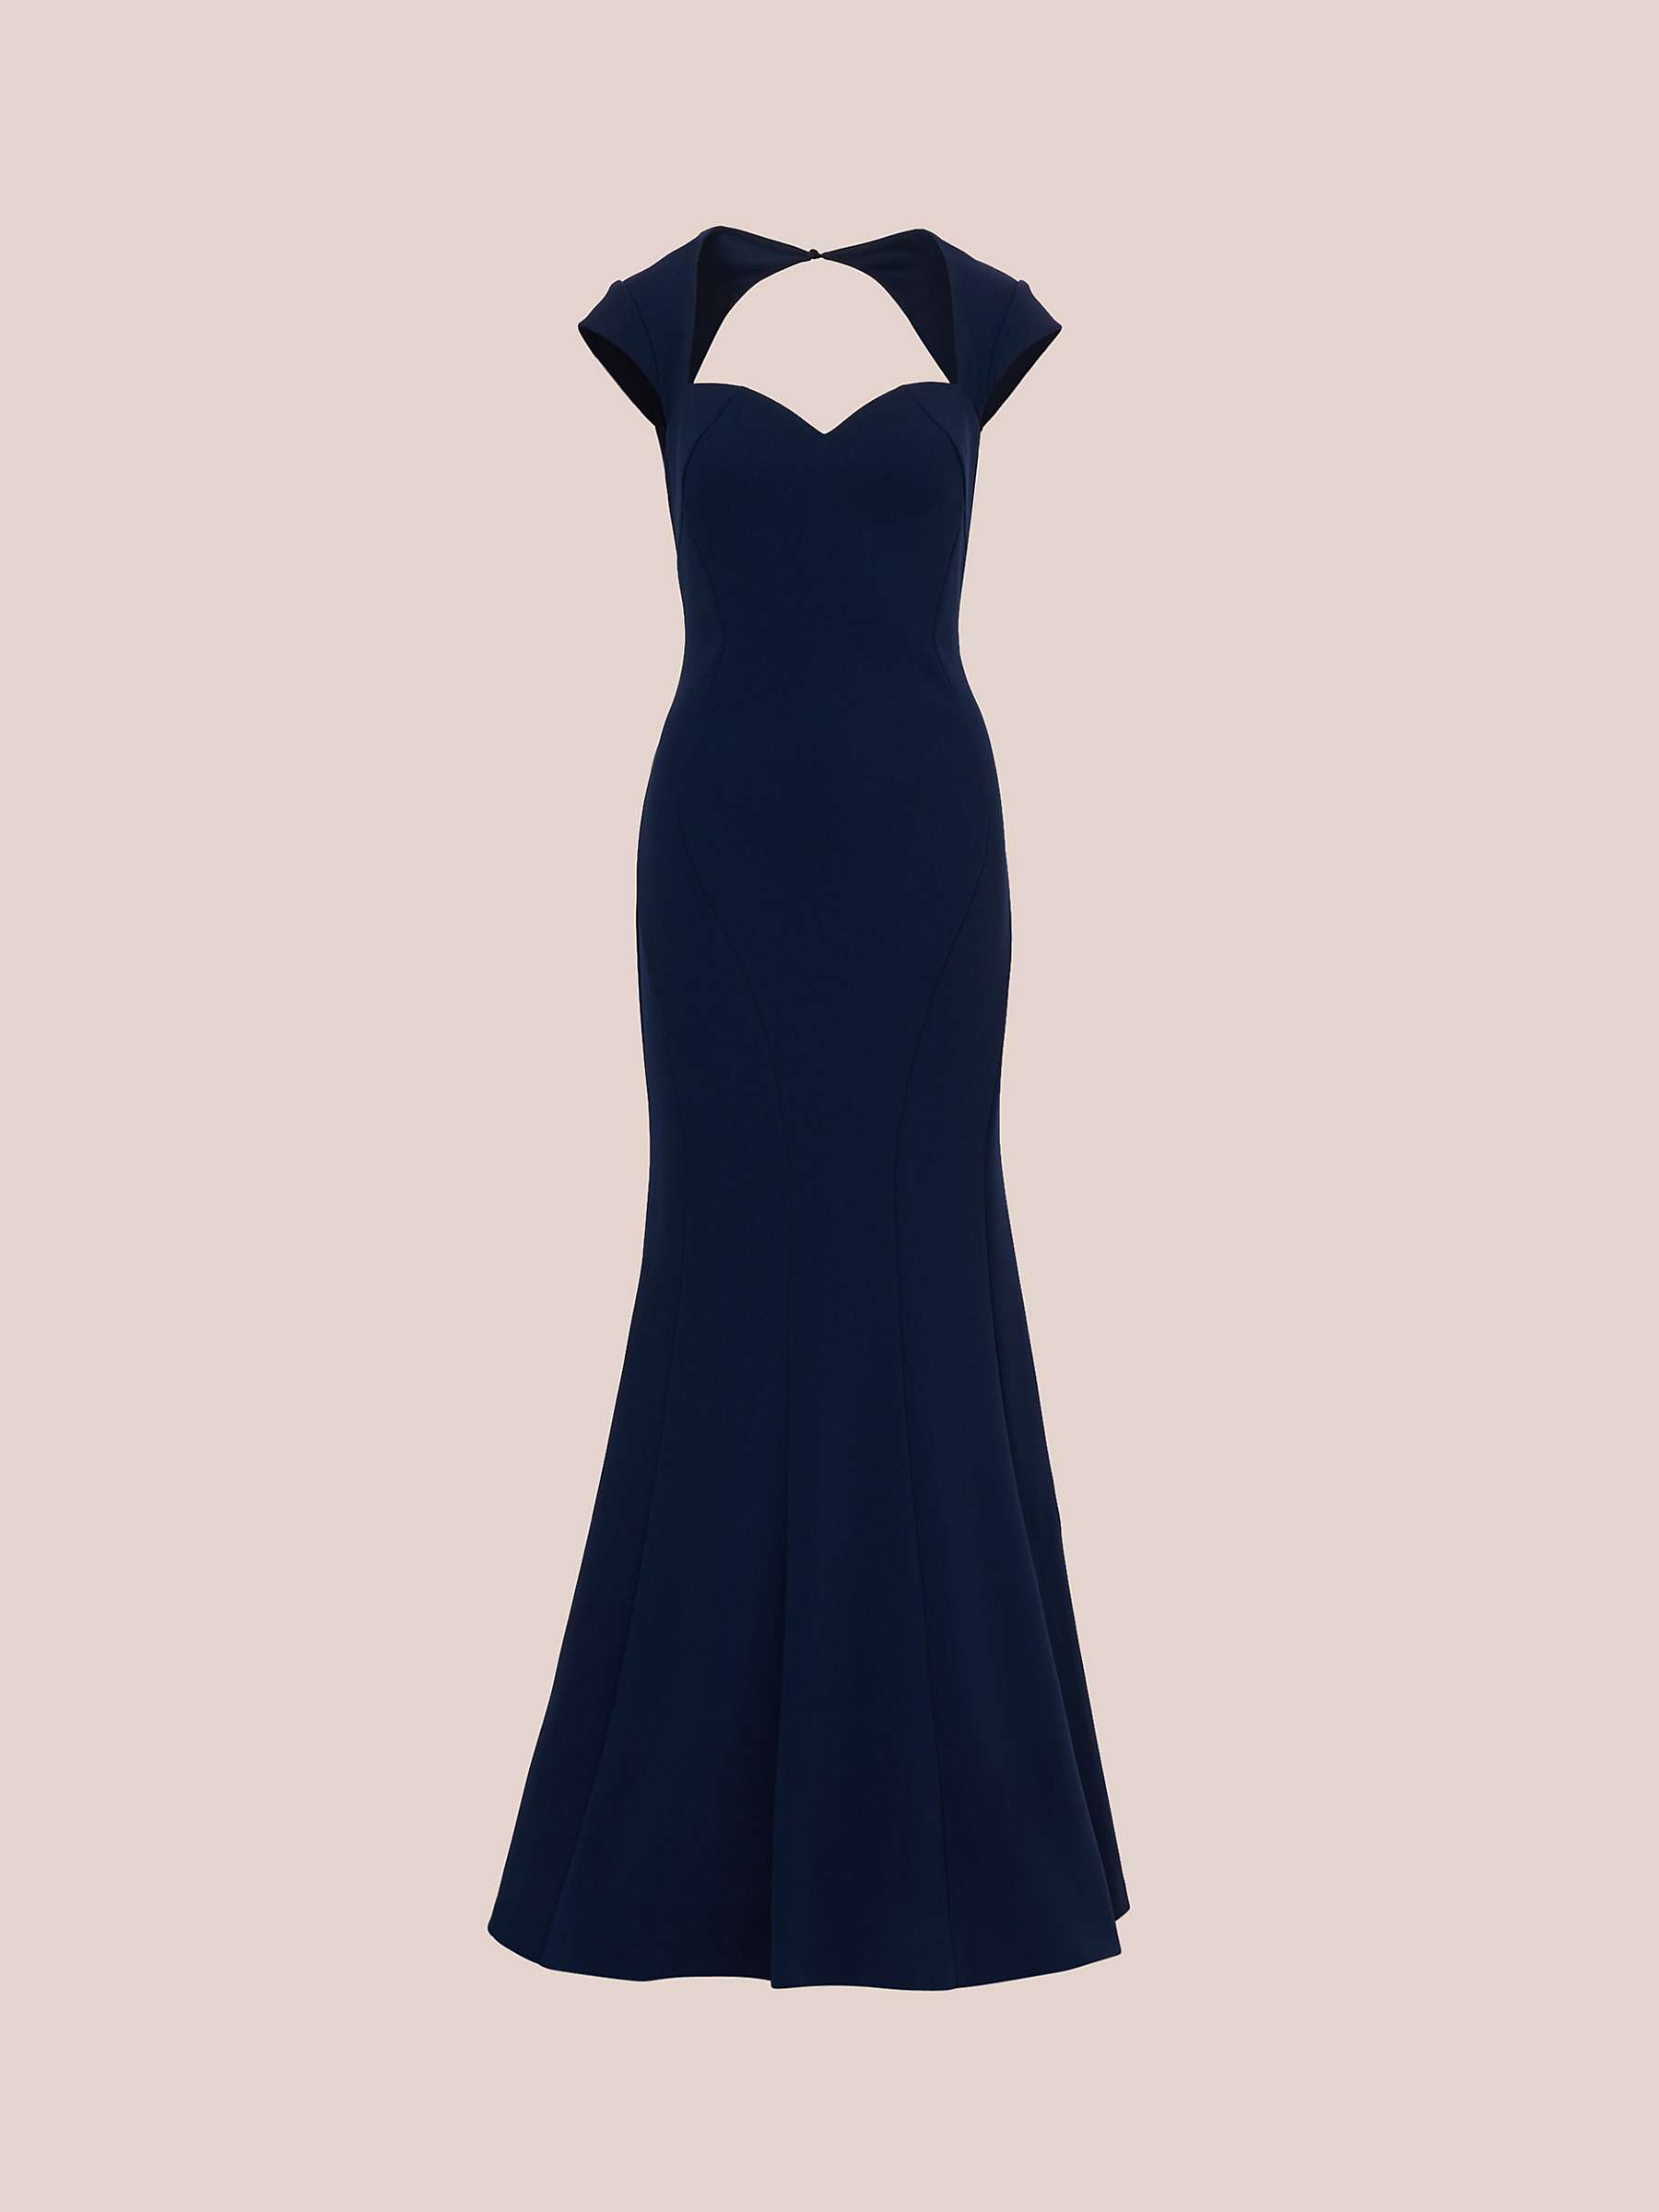 Buy Adrianna Papell Aidan Mattox by Adrianna Papell Cap Sleeve Gown, Twilight Online at johnlewis.com